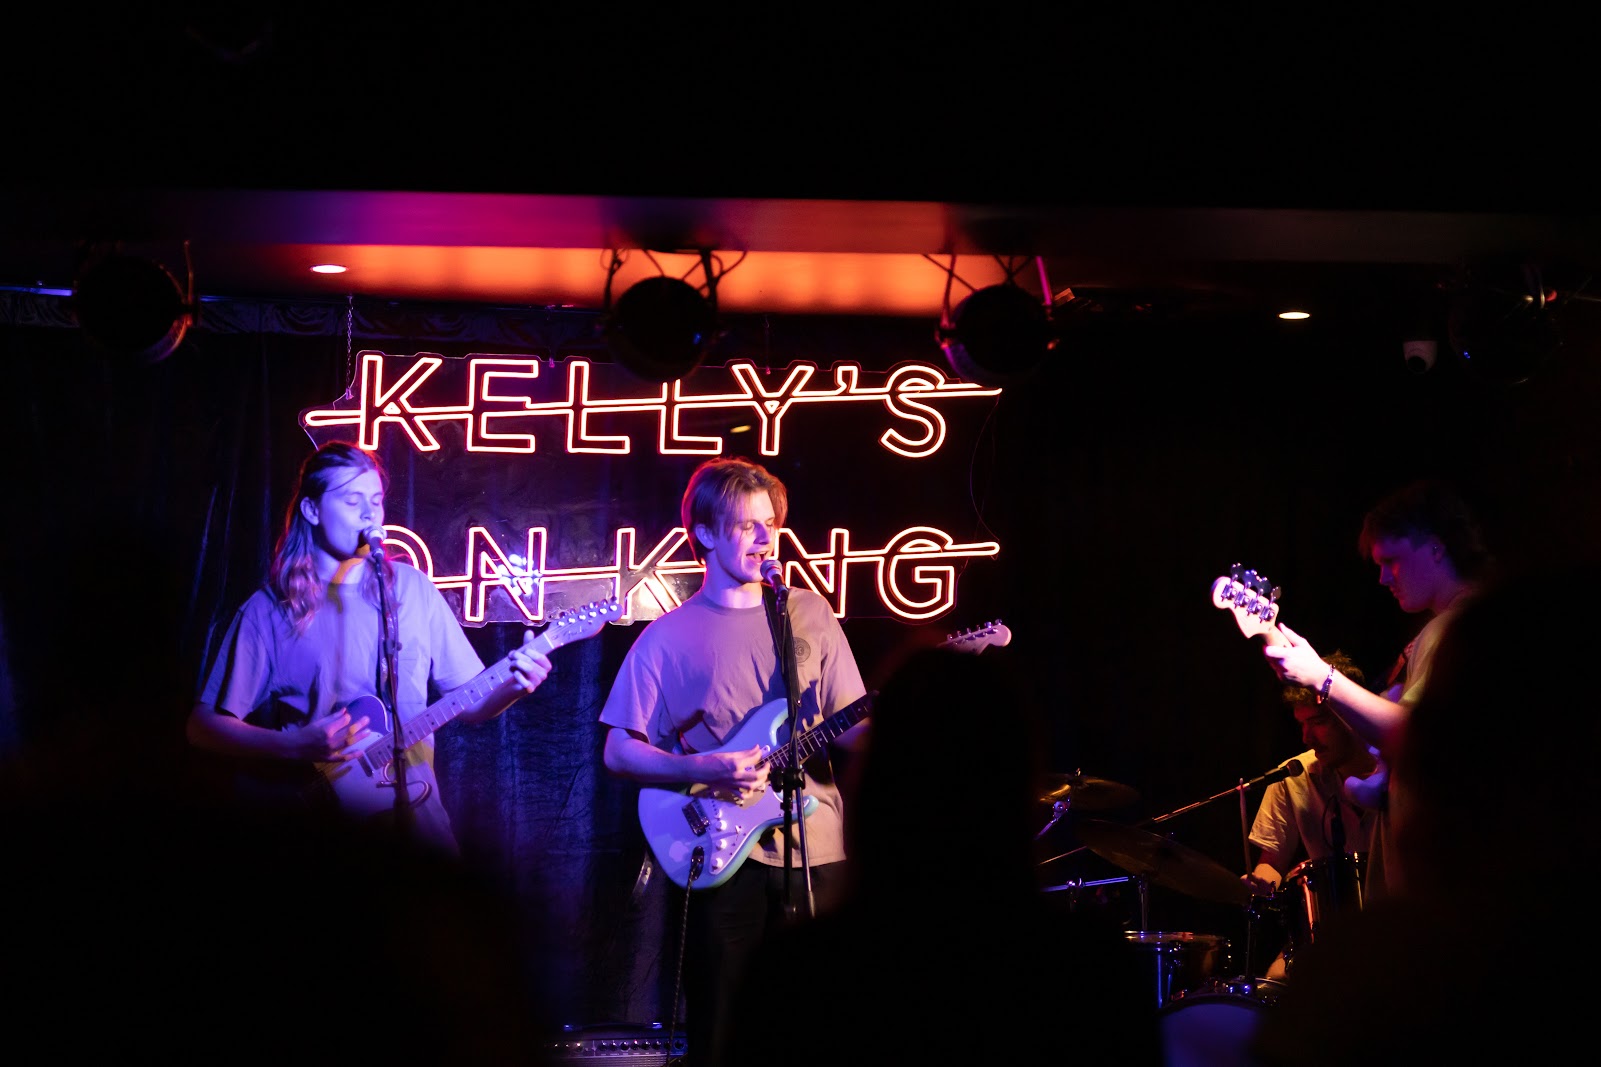 The band performing at Kelly's on King